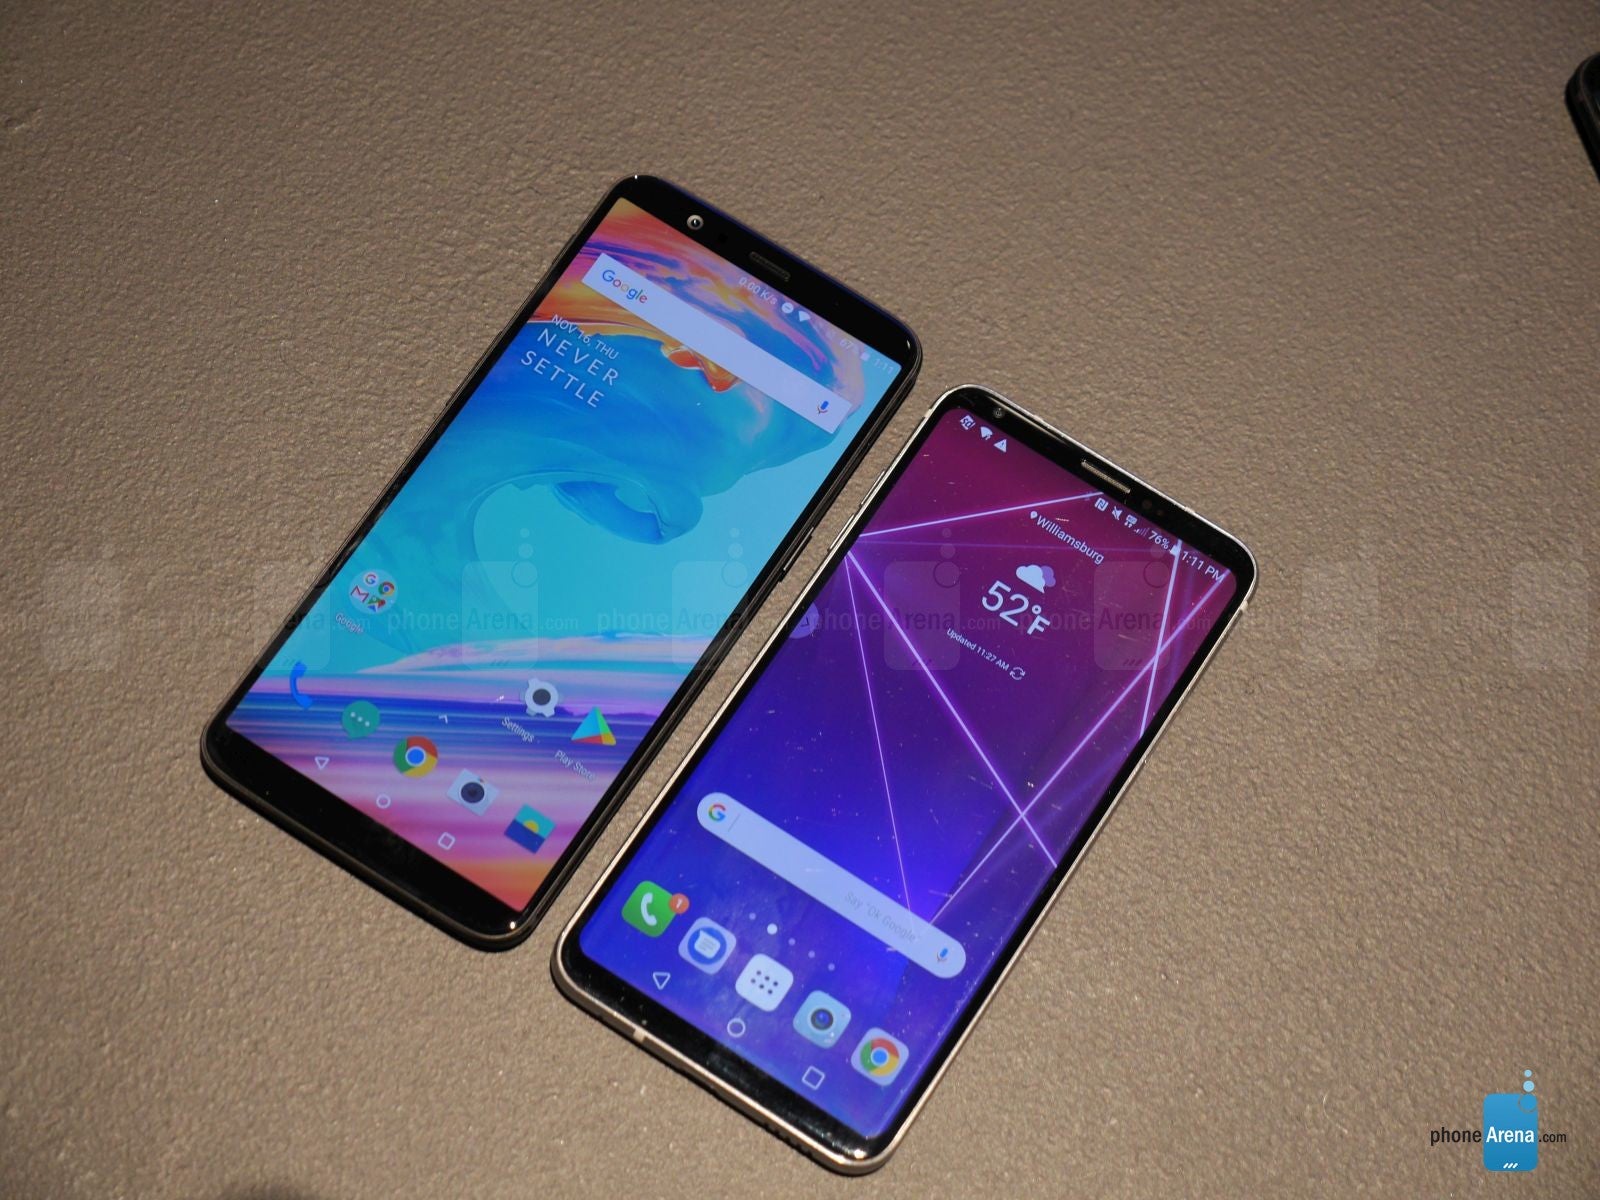 Results: LG V30 wins popularity contest vs OnePlus 5T